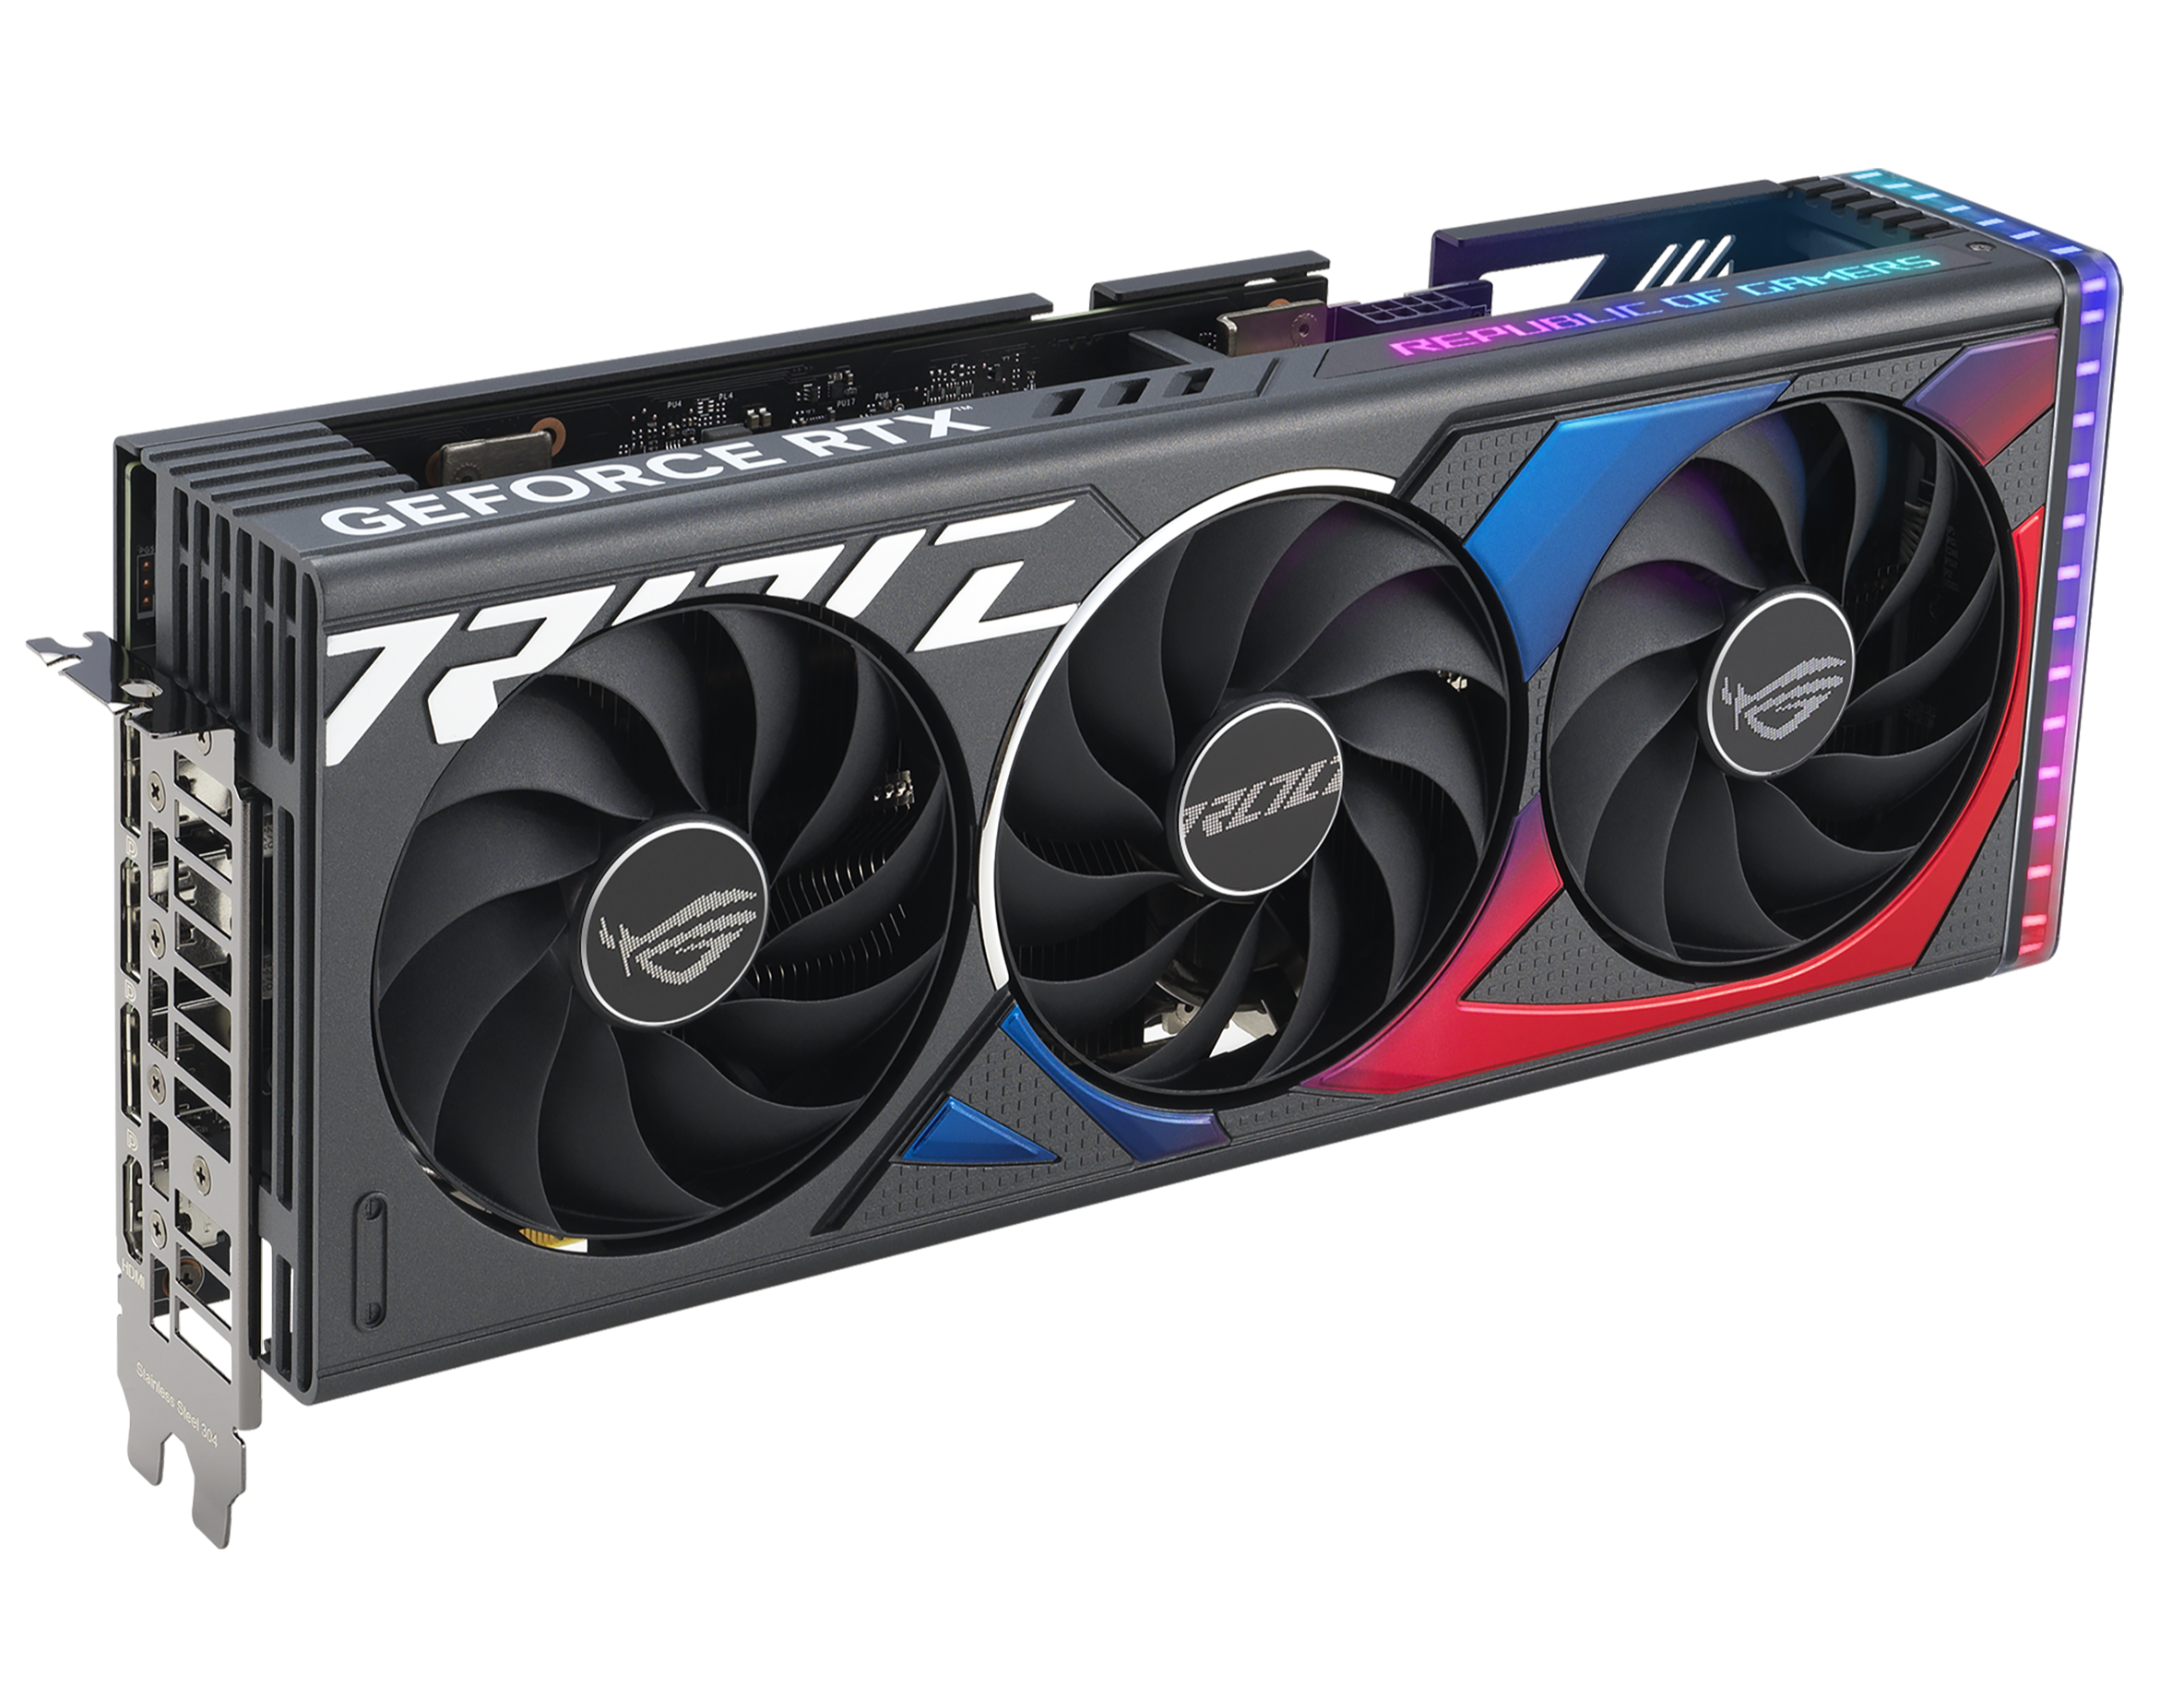 ASUS presents the GeForce RTX 4060 Ti and GeForce RTX 4060 graphics cards